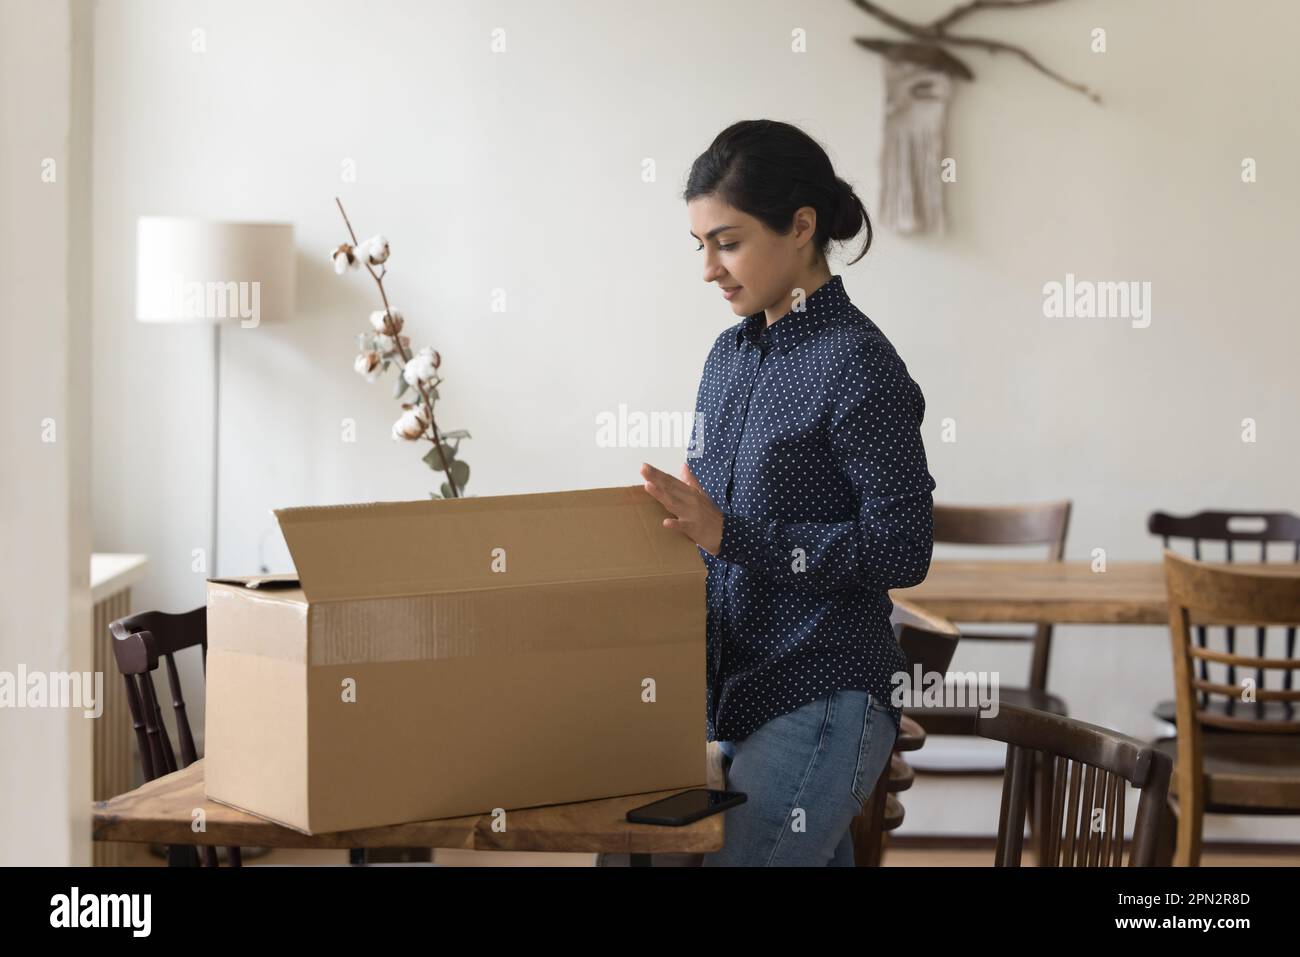 Indian woman get parcel, open box to review received goods Stock Photo